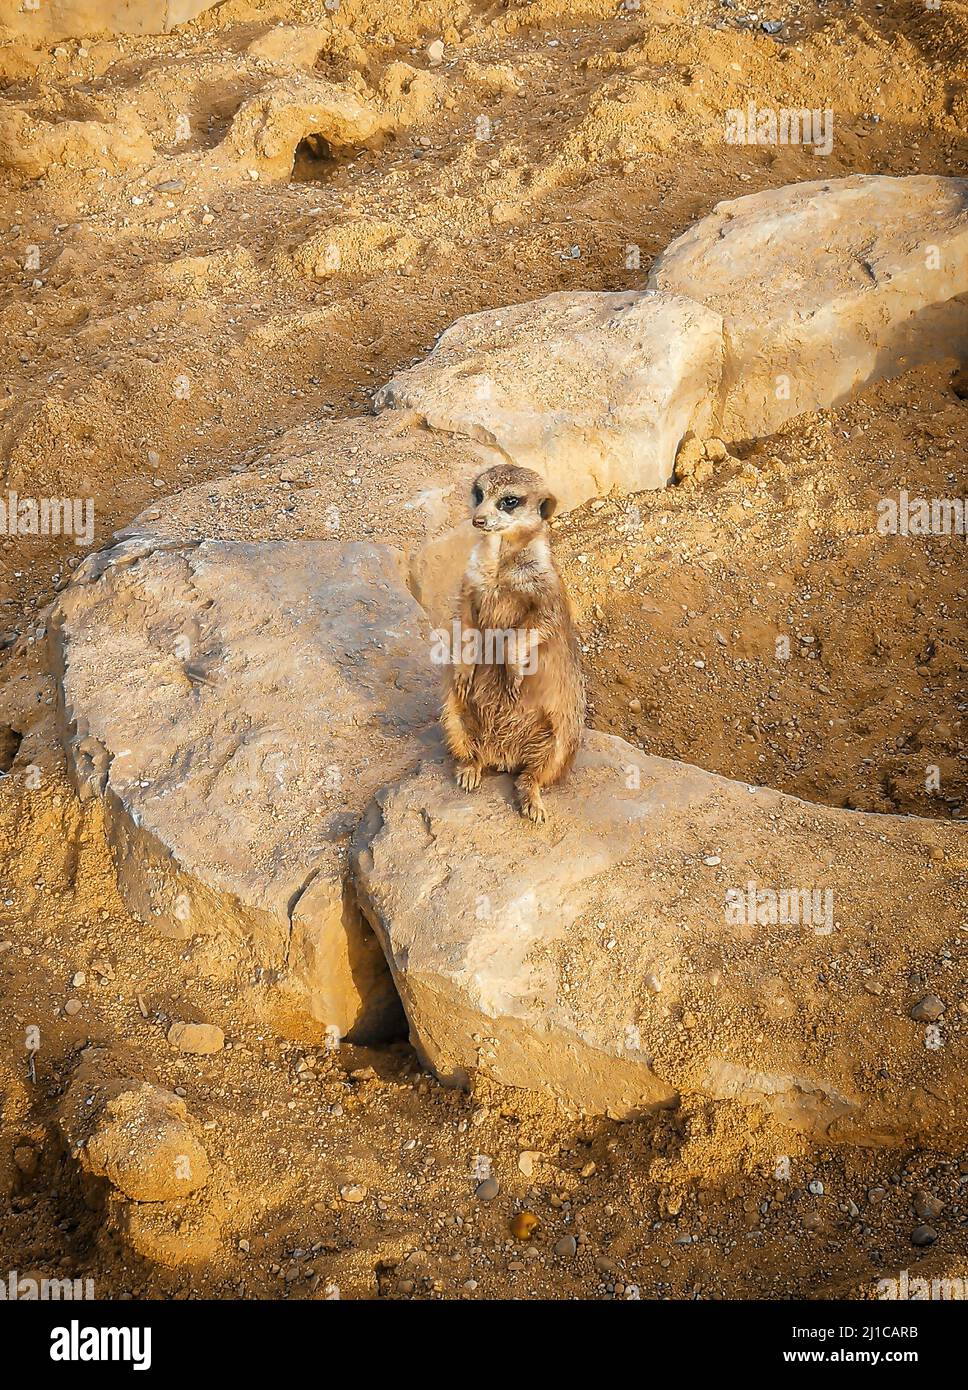 Portrait of a Meerkat Suricata suricatta, an African indigenous animal, a small carnivore belonging to the mongoose family Stock Photo